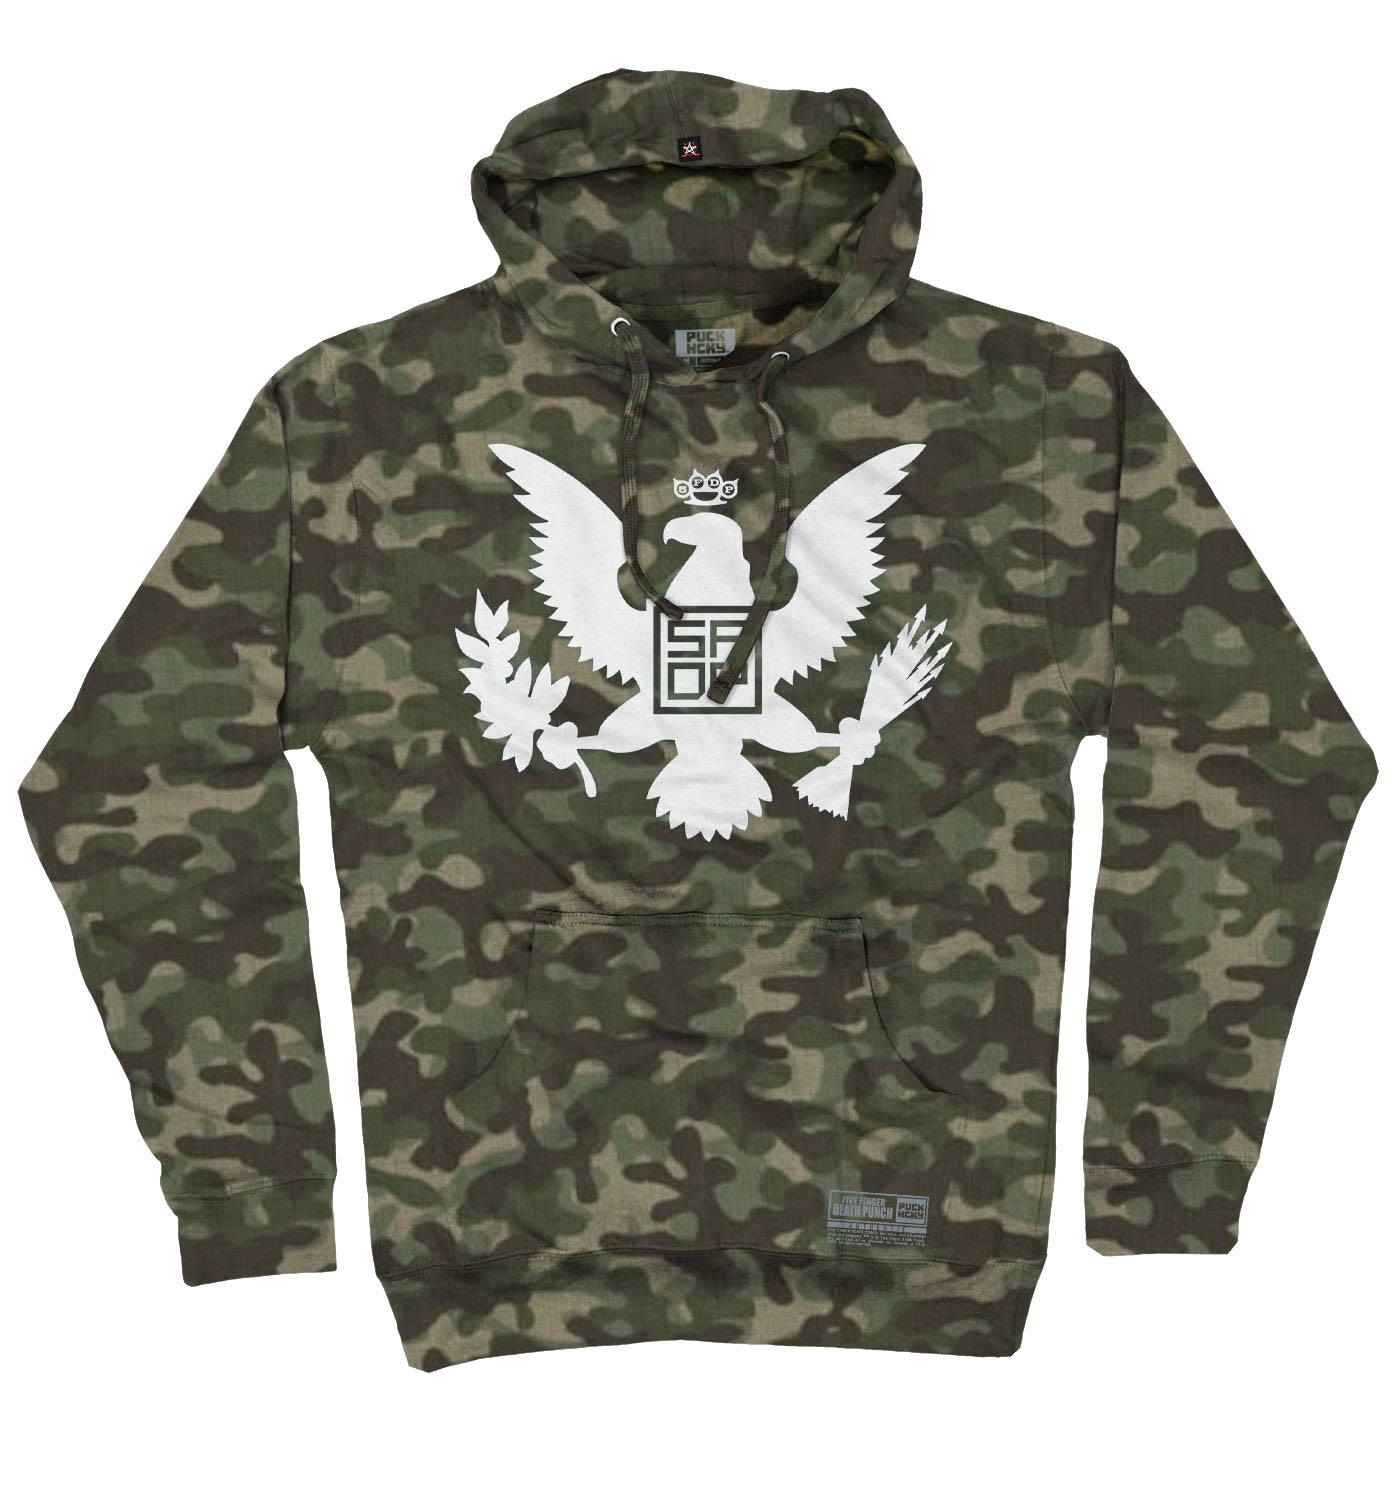 FIVE FINGER DEATH PUNCH 'EAGLE CREST' pullover hockey hoodie in forest camo front view